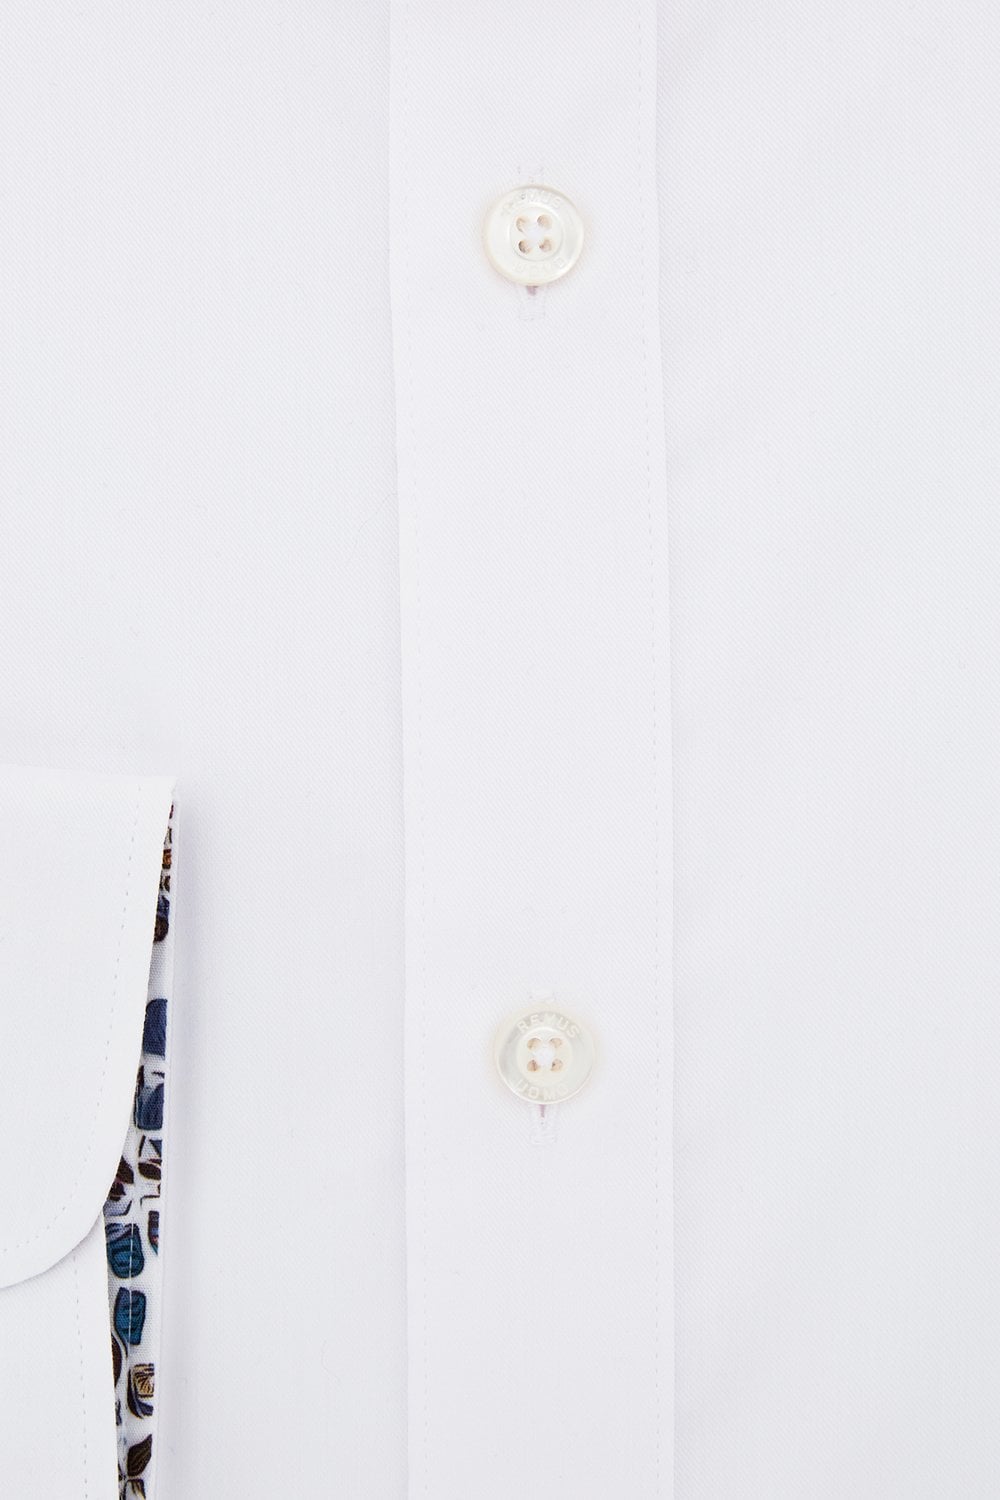 Buy the Remus Uomo 18446 Shirt in White at Intro. Spend £50 for free UK delivery. Official stockists. We ship worldwide.